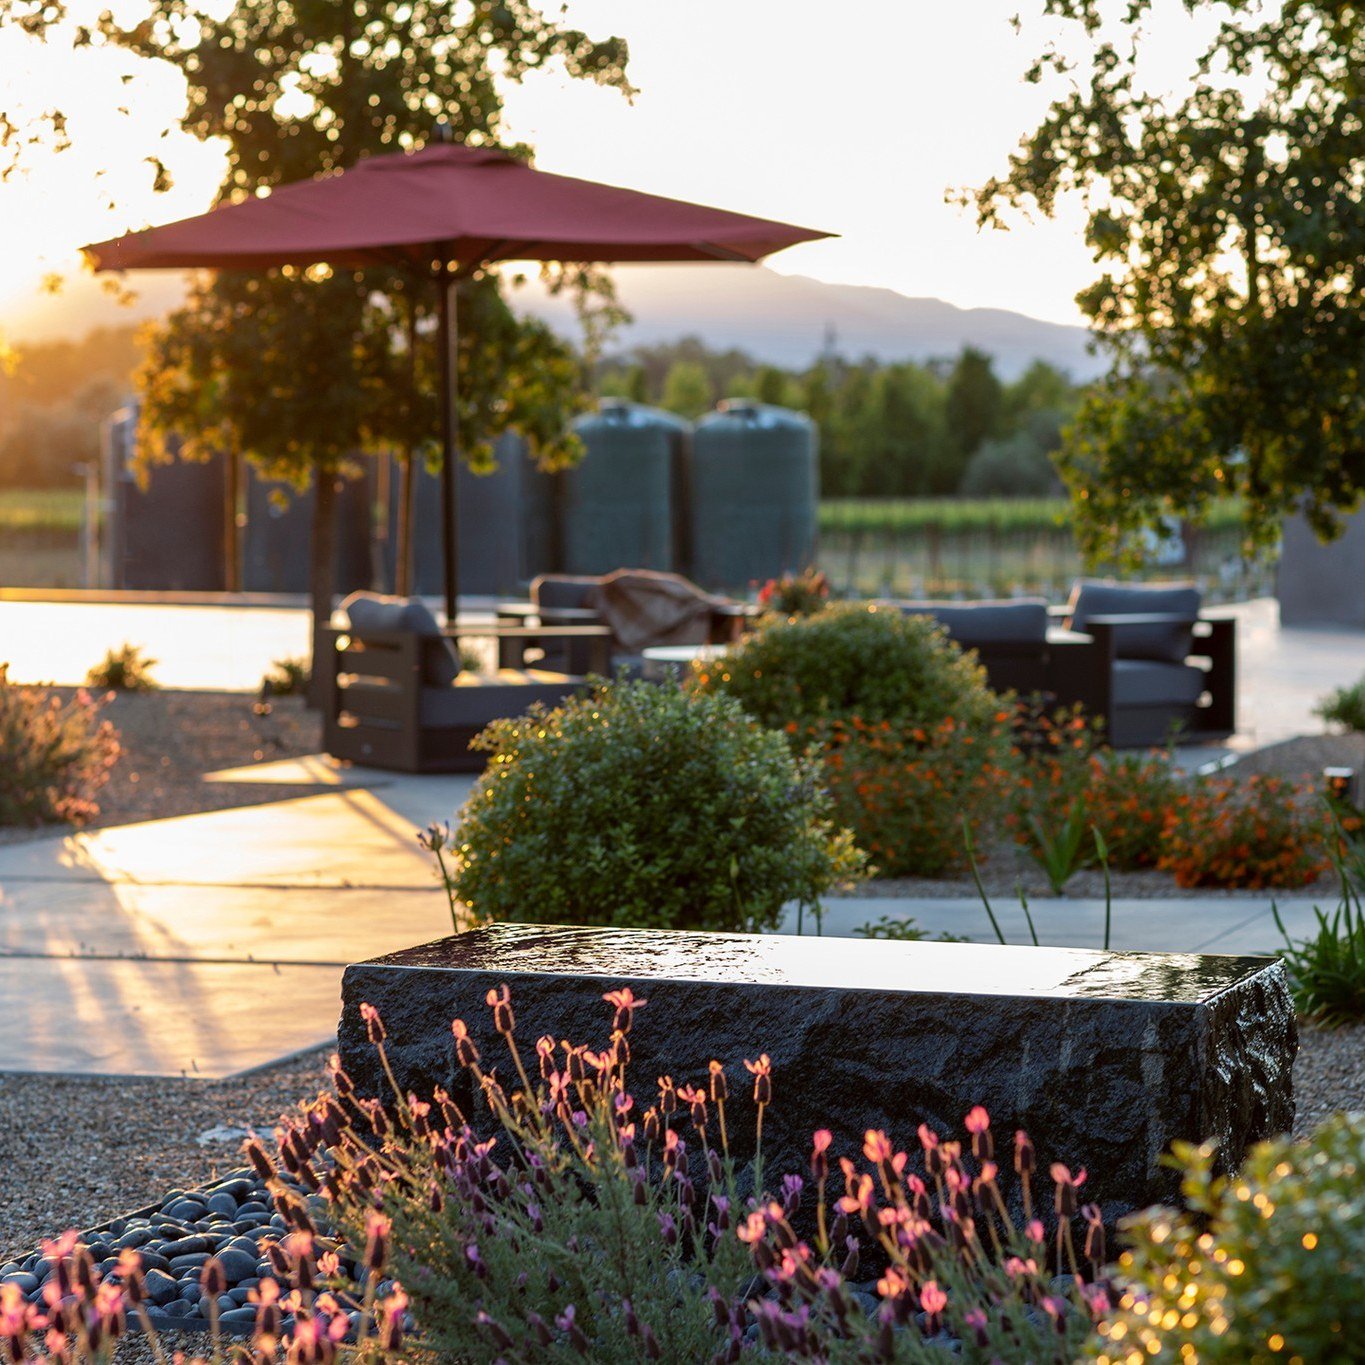 The @sevenapart winery property is welcoming and wonderful thanks to landscape architect @ericblasen_landscape_architect  with numerous water features and wild florals. The custom shade structure designed by #shawbackdesign casts a unique shadow on t